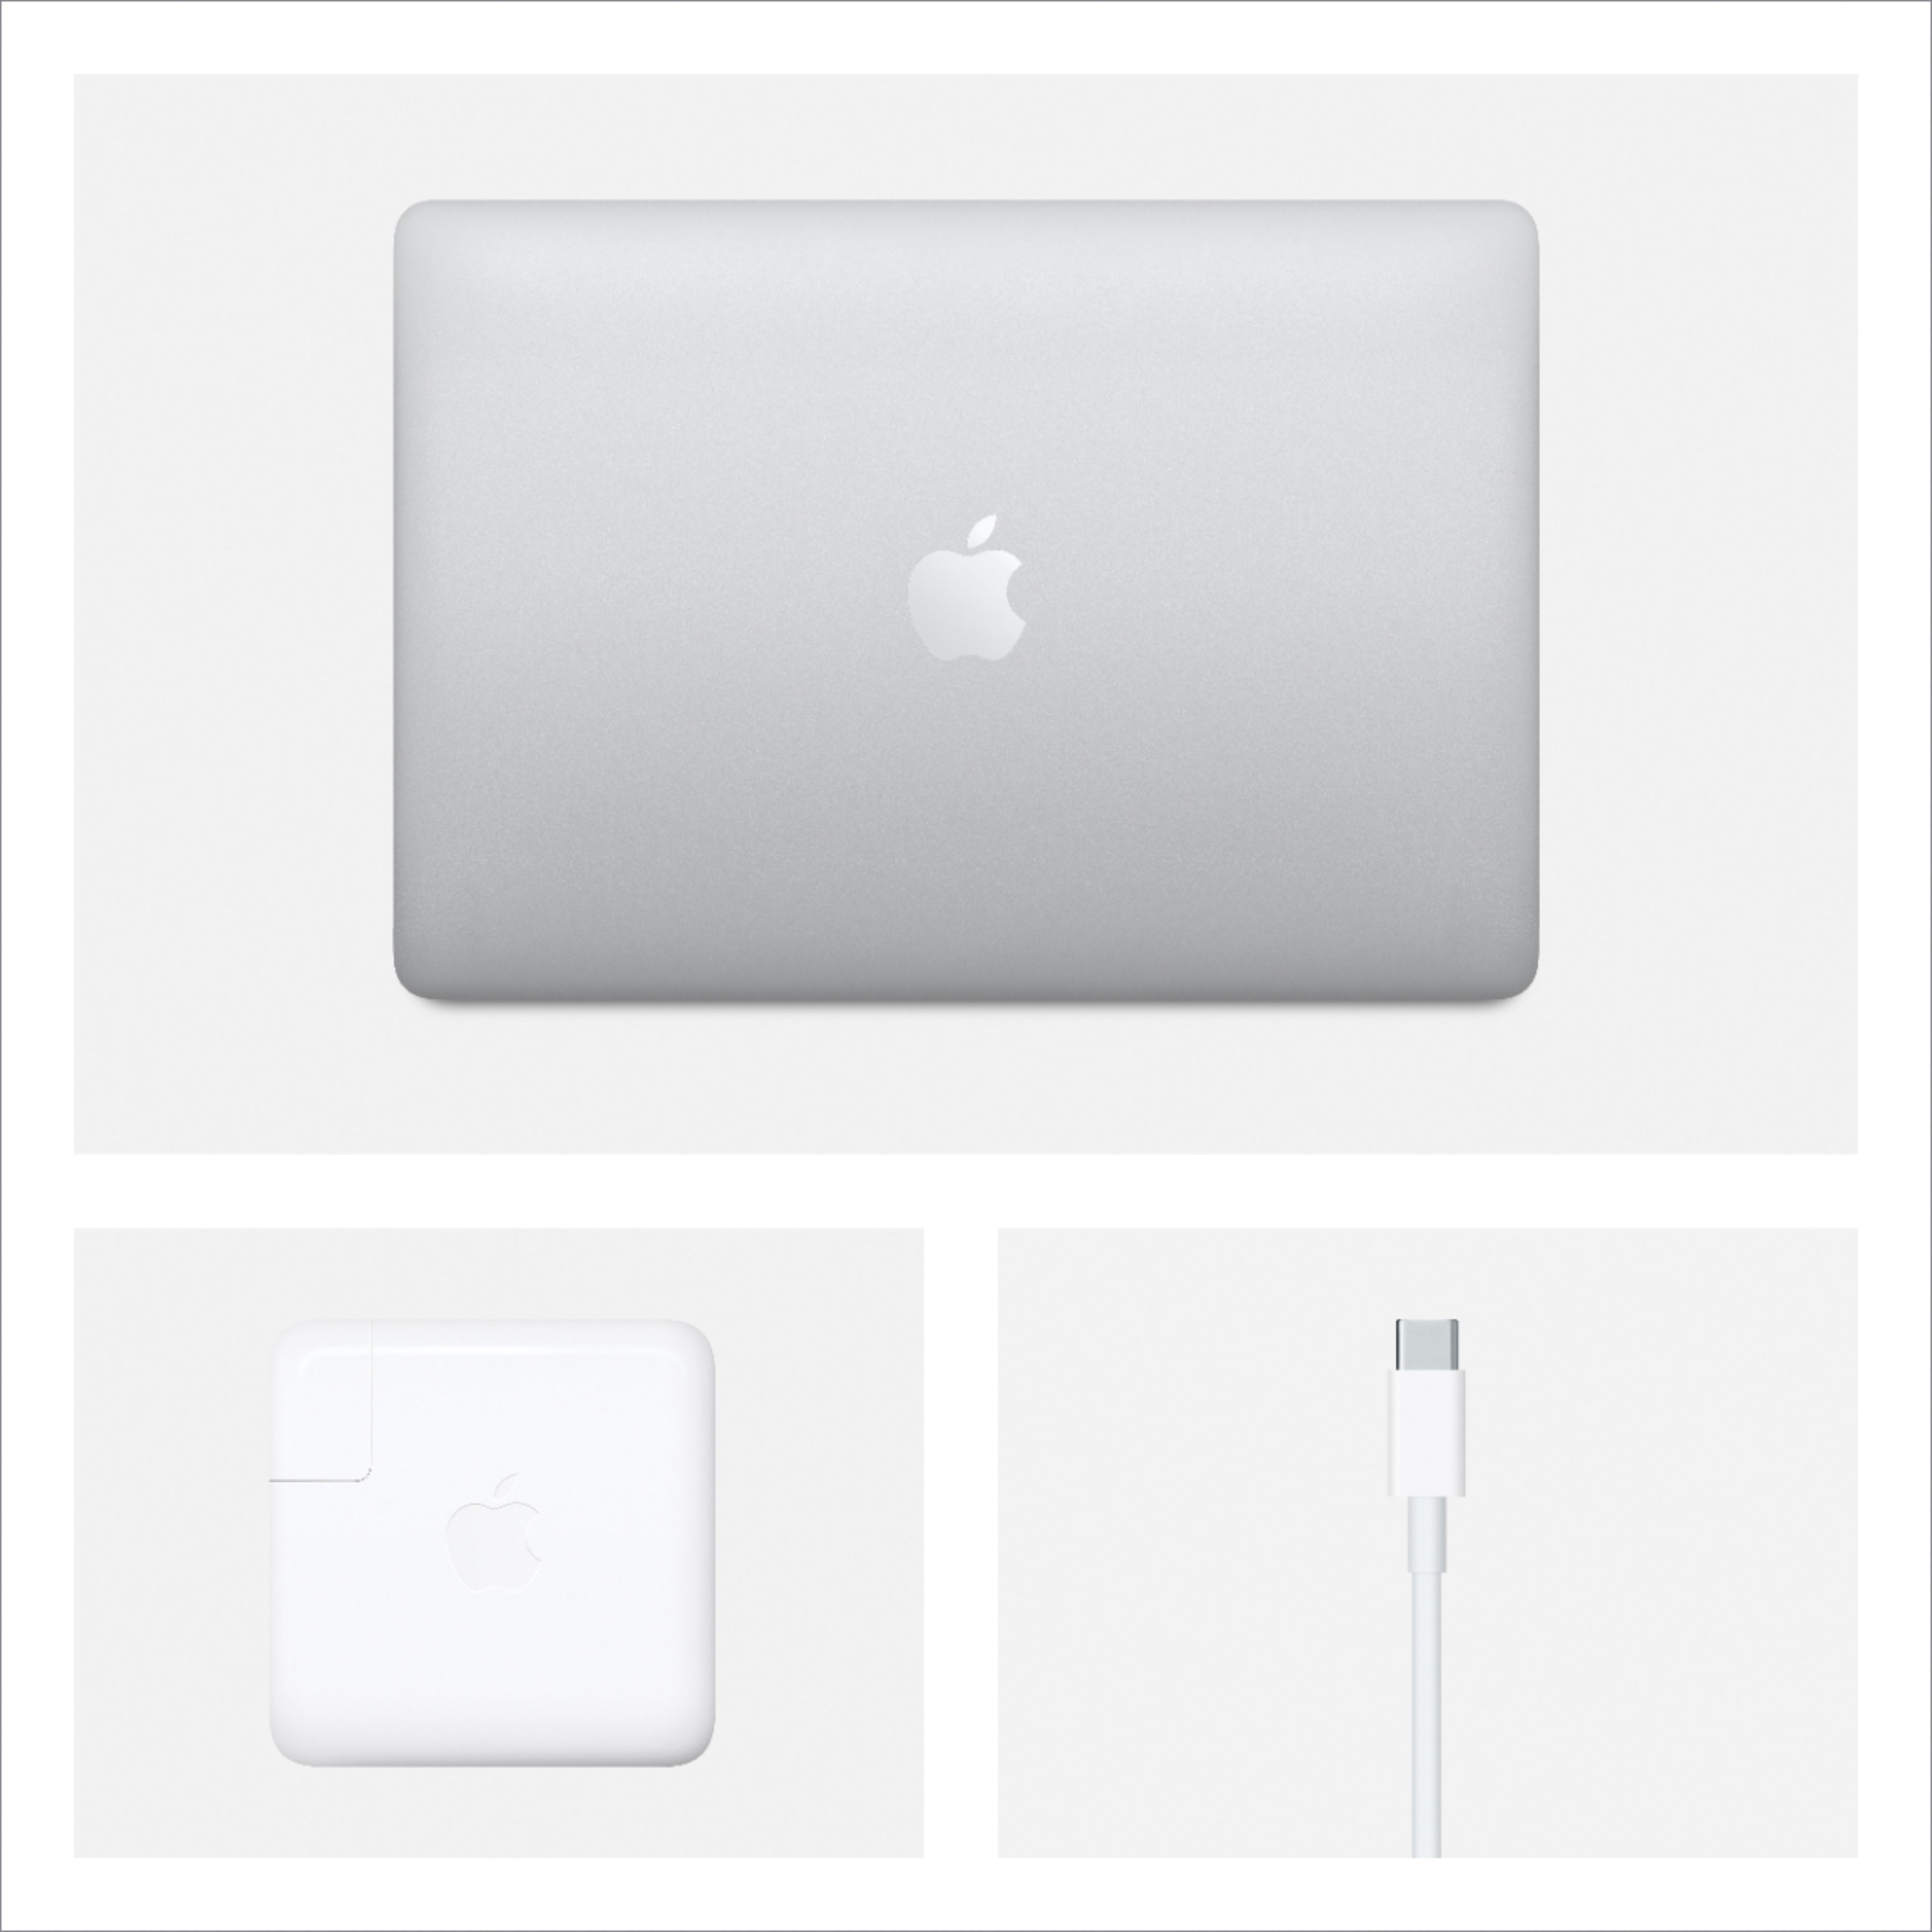 Questions and Answers: Apple MacBook Pro 13